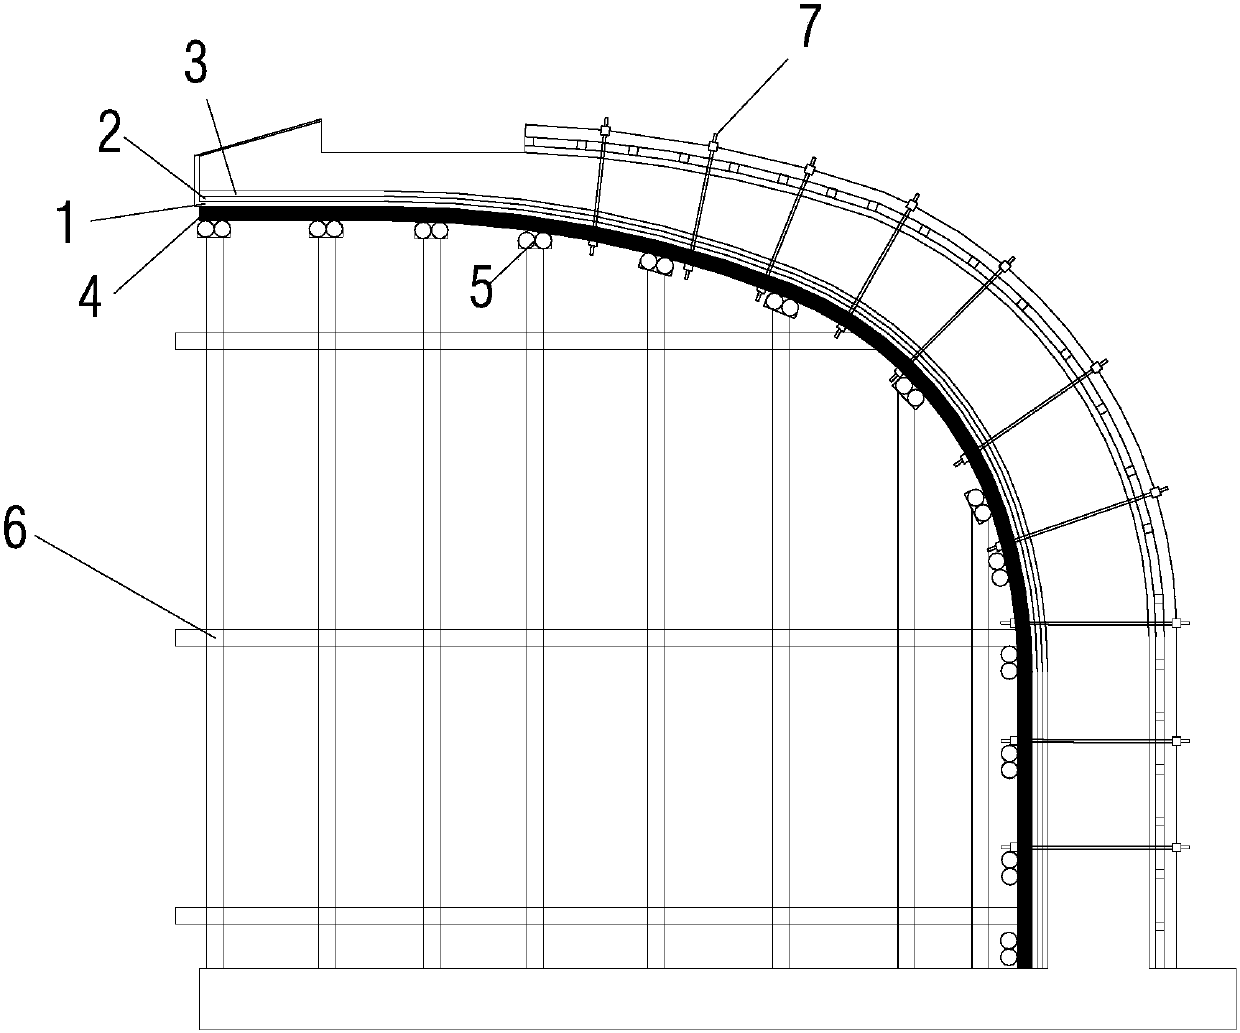 Construction method of compound formwork for special-shaped hyperboloid wood-grain fair-faced concrete wall